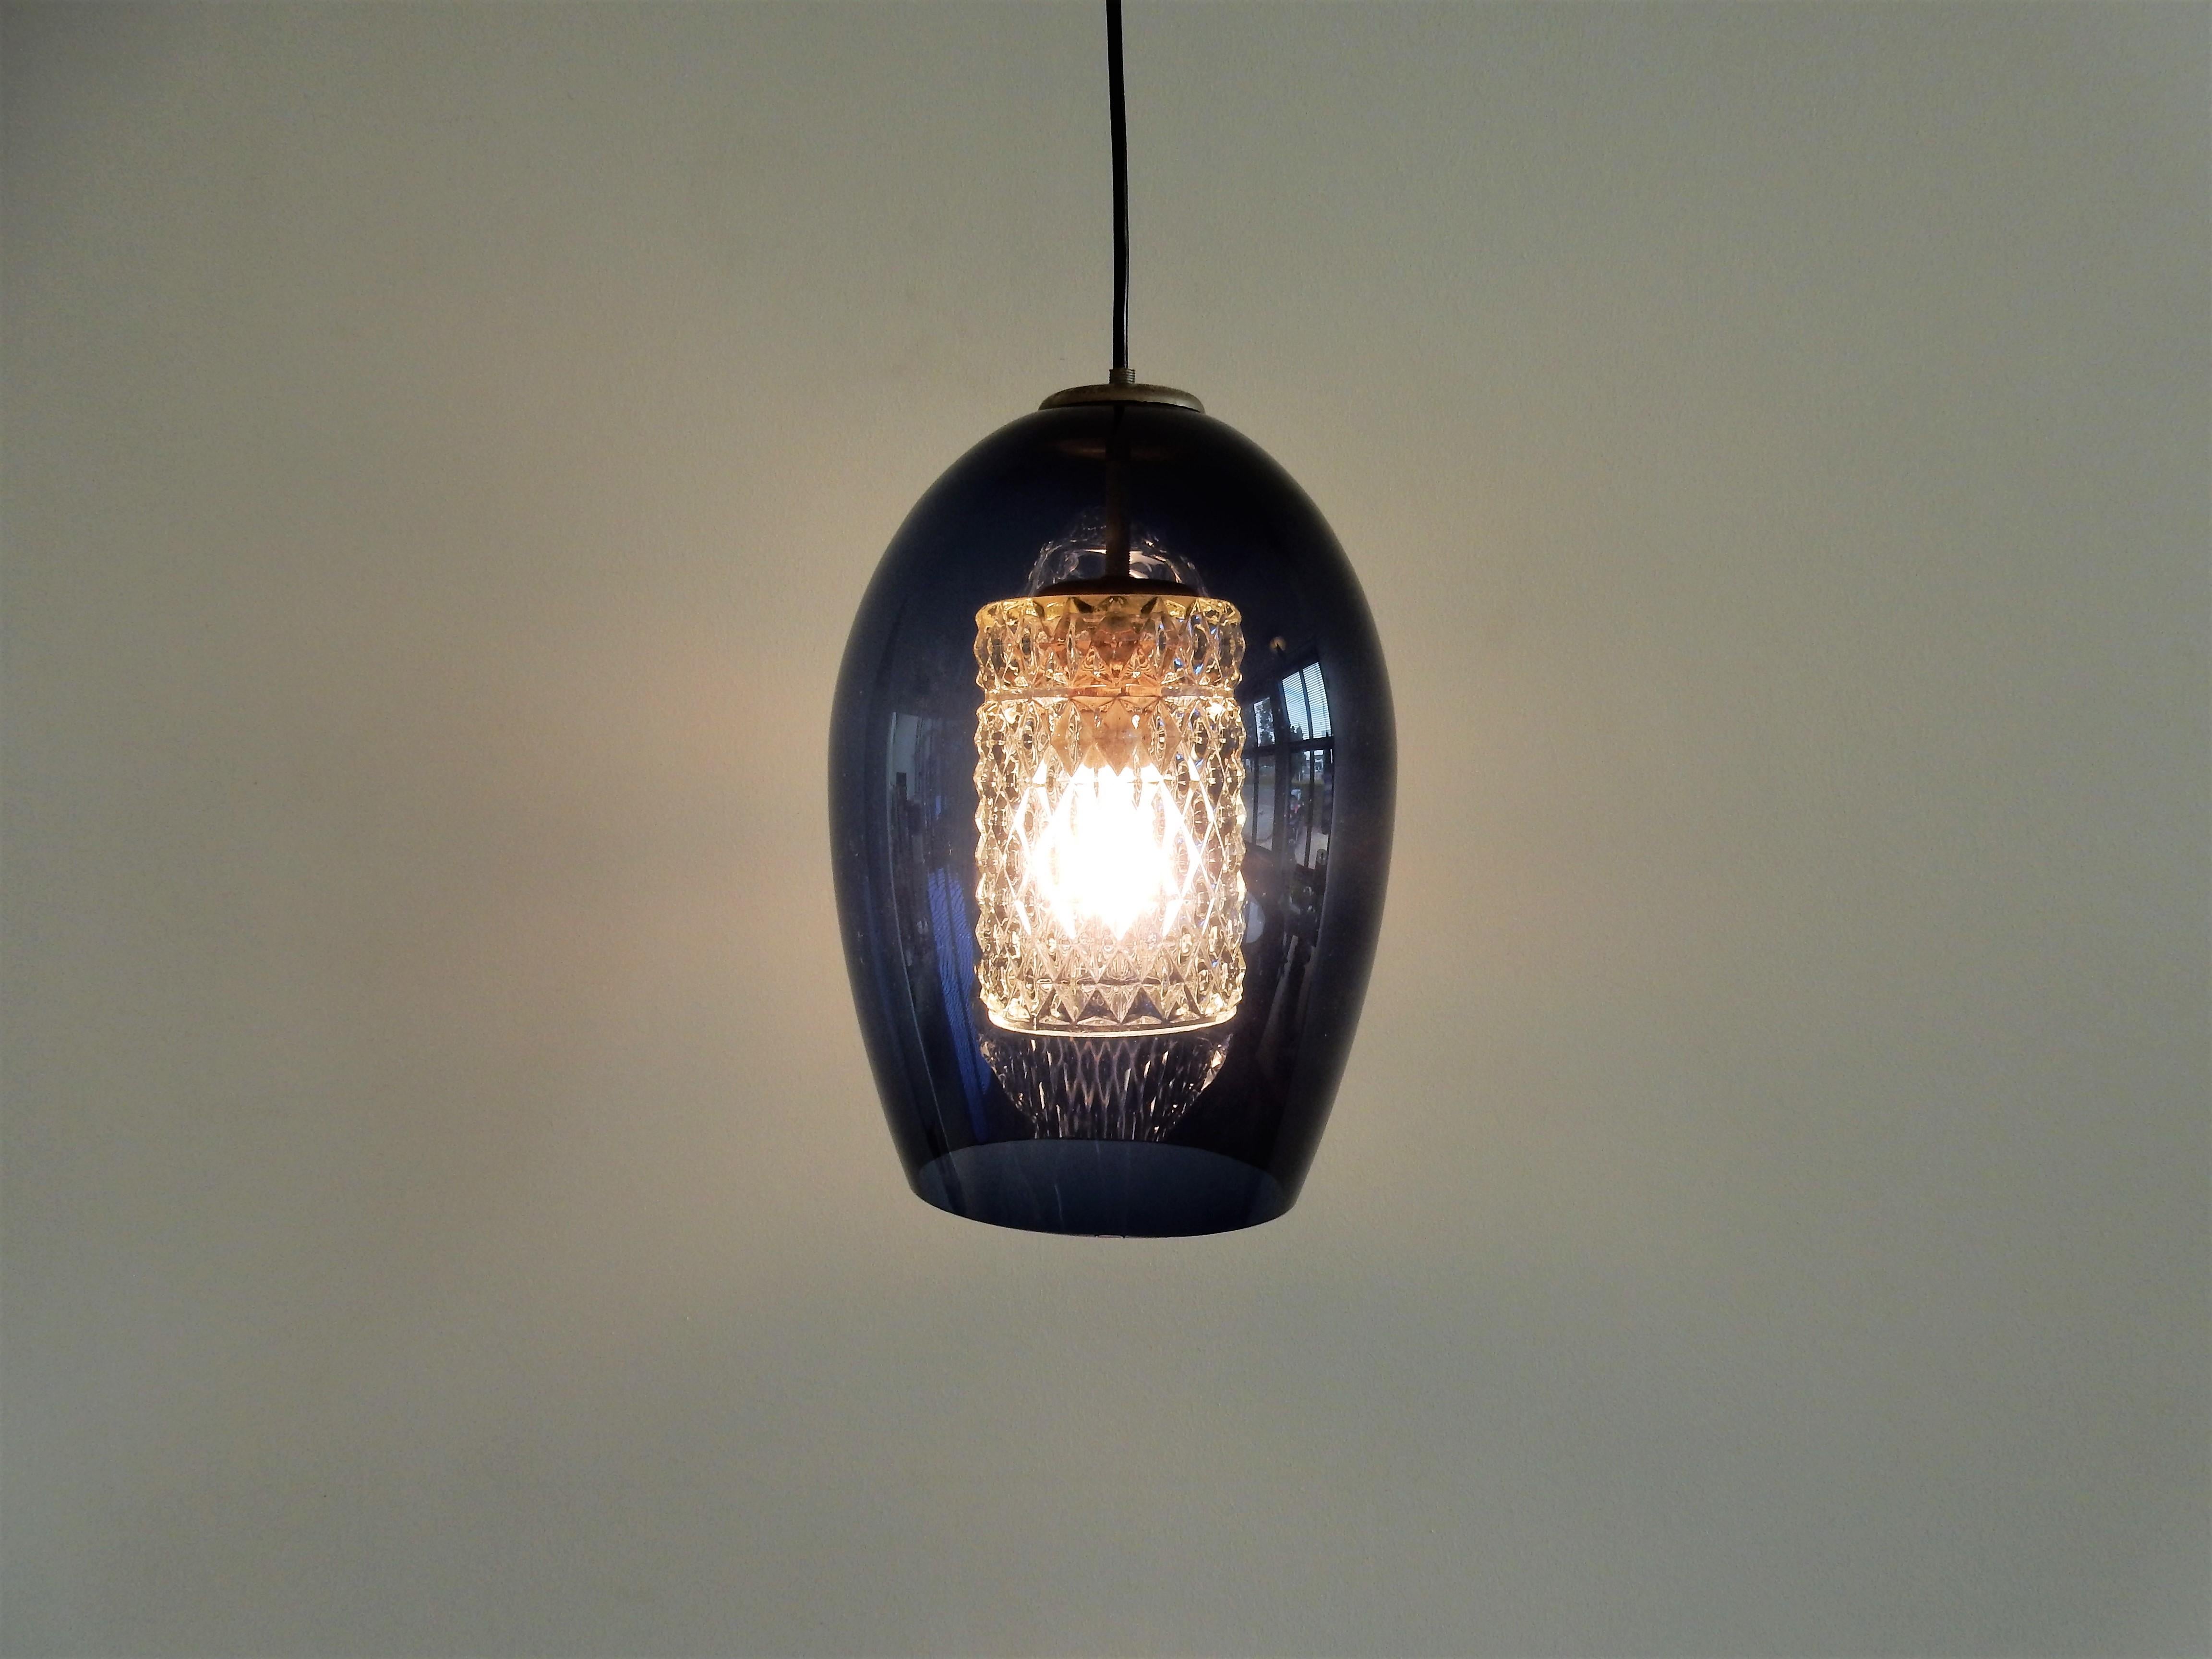 Late 17th Century Blue and Clear Glass Pendant Lamp by Carl Fagerlund (attr.) for Orrefors (attr.)